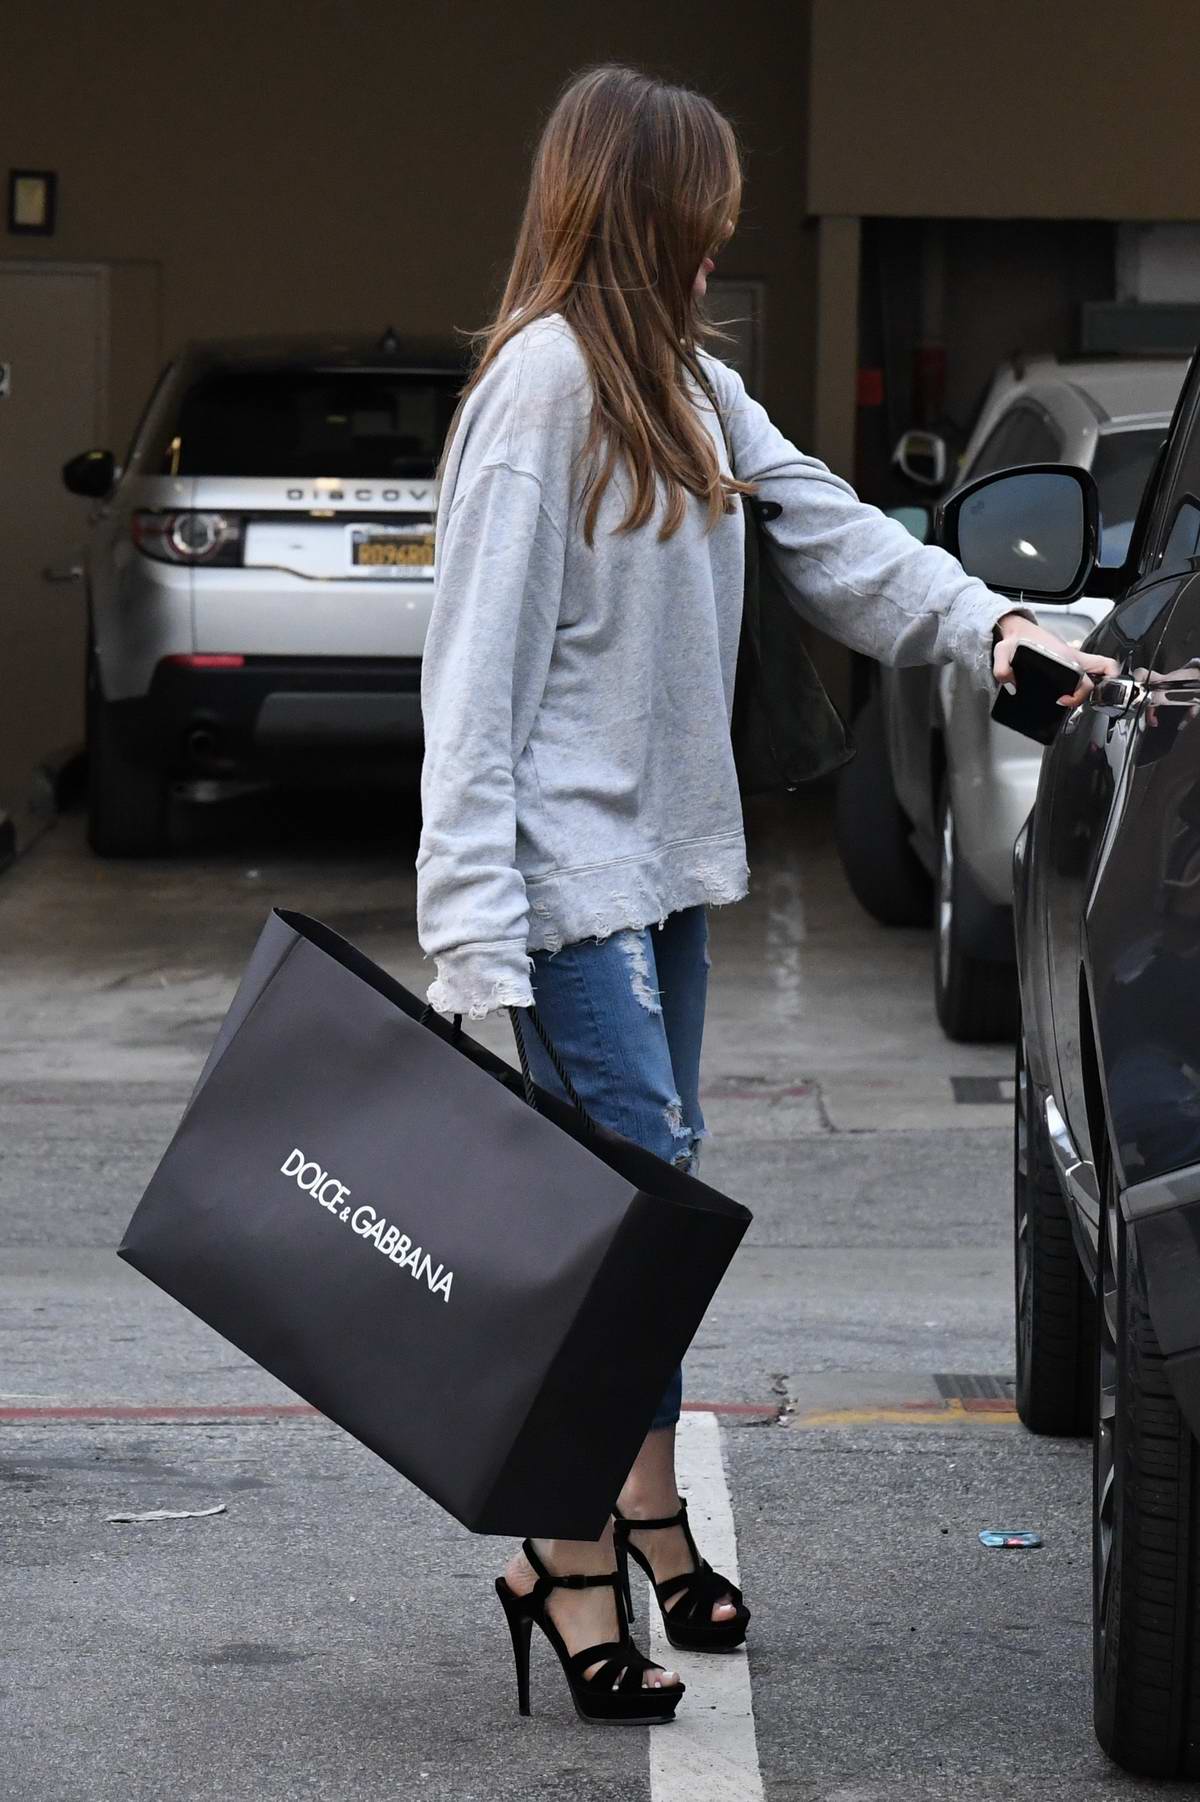 Sofia Vergara Is All Smiles After Some Shopping At Dolce And Gabbana In Beverly Hills California